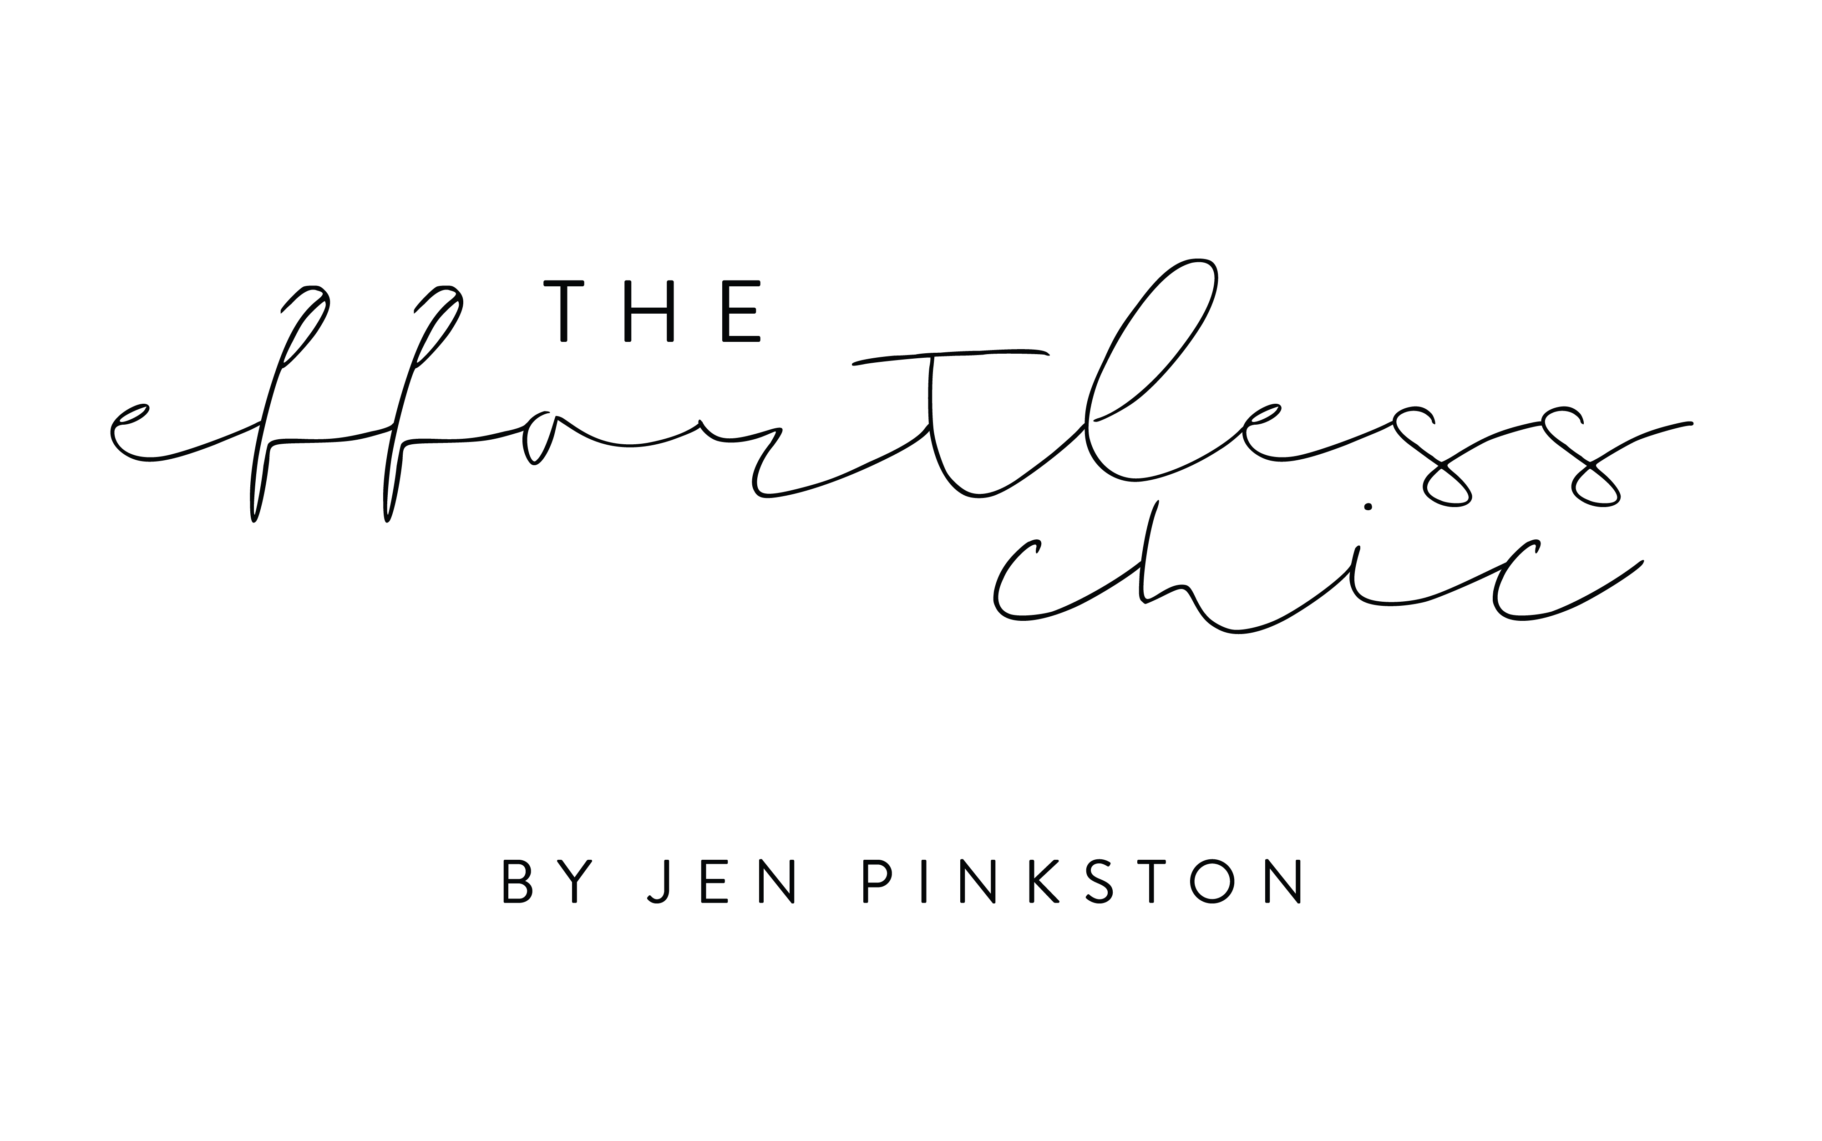 The-Effortless-Chic-Logo_BW_FINAL-e1558967392603.png